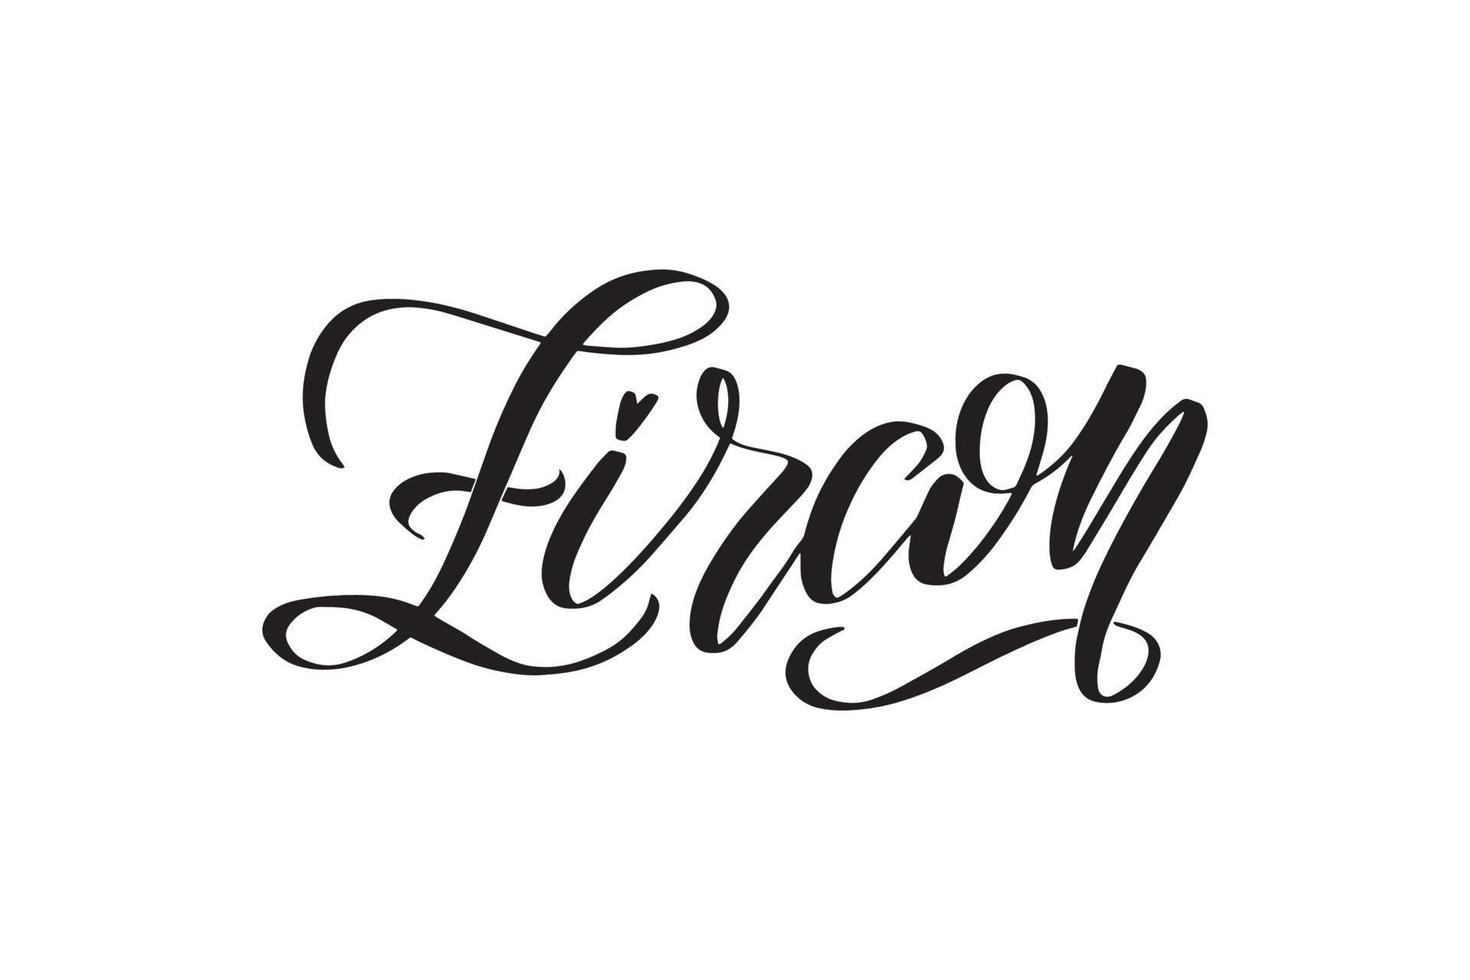 Zircon. Inspirational handwritten brush lettering. Vector calligraphy stock illustration isolated on white background. Typography for banners, badges, postcard, tshirt, prints.